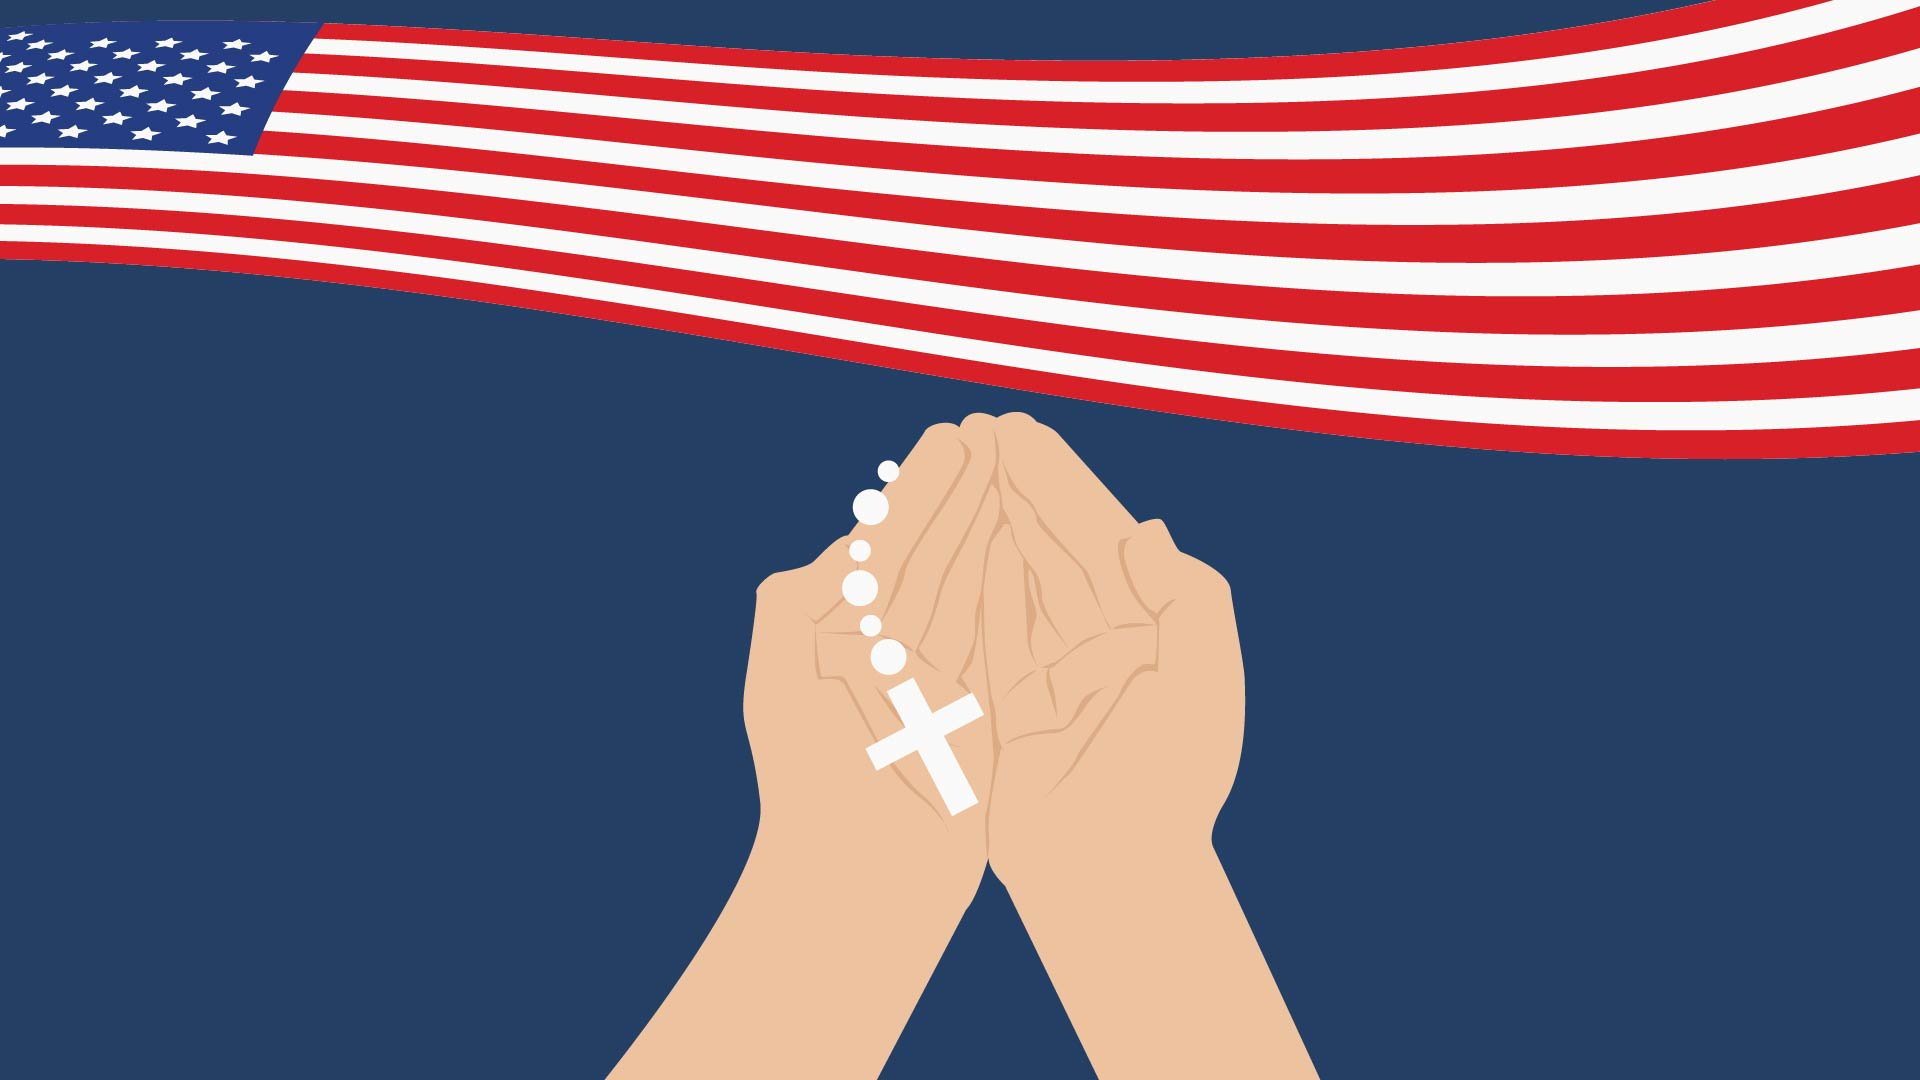 Free National Day of Prayer Vector Background